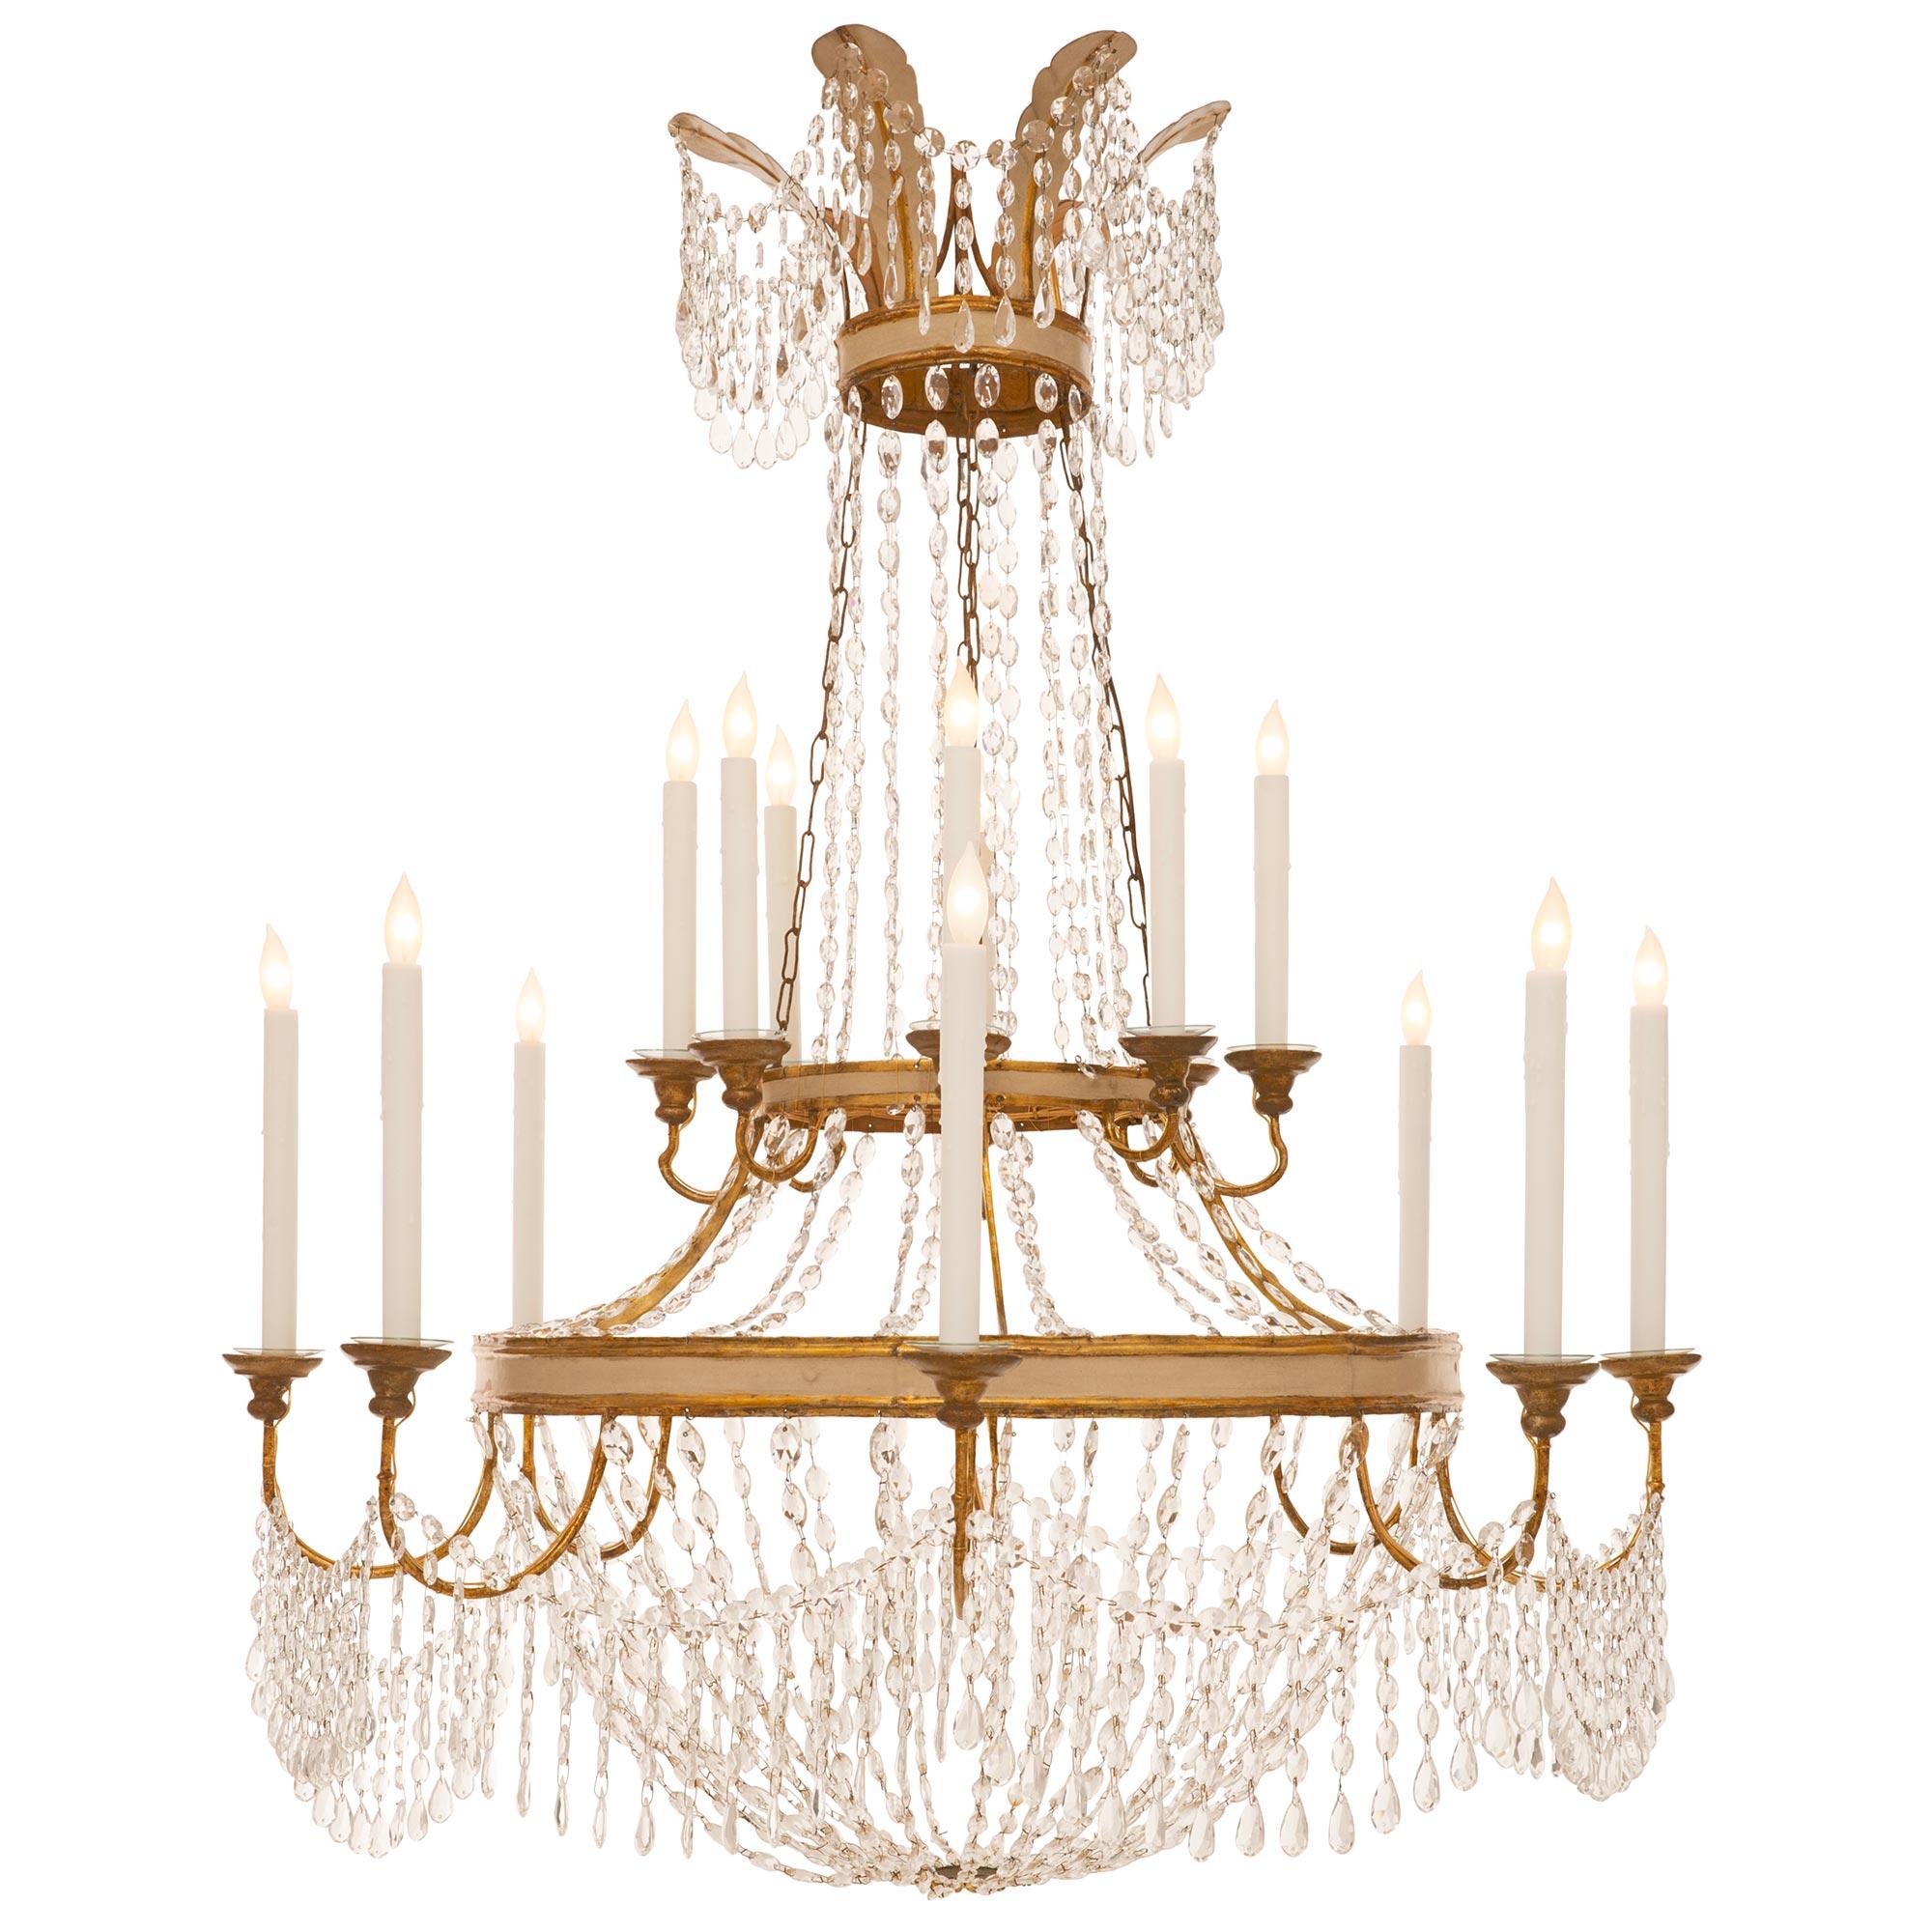 An elegant Italian 18th century Neo-Classical st. patinated off white, Mecca and Iron chandelier. The two tiered sixteen arm chandelier has a montgolfière shape. The lower patinated off white and Mecca finished metal band supports the scrolled arms